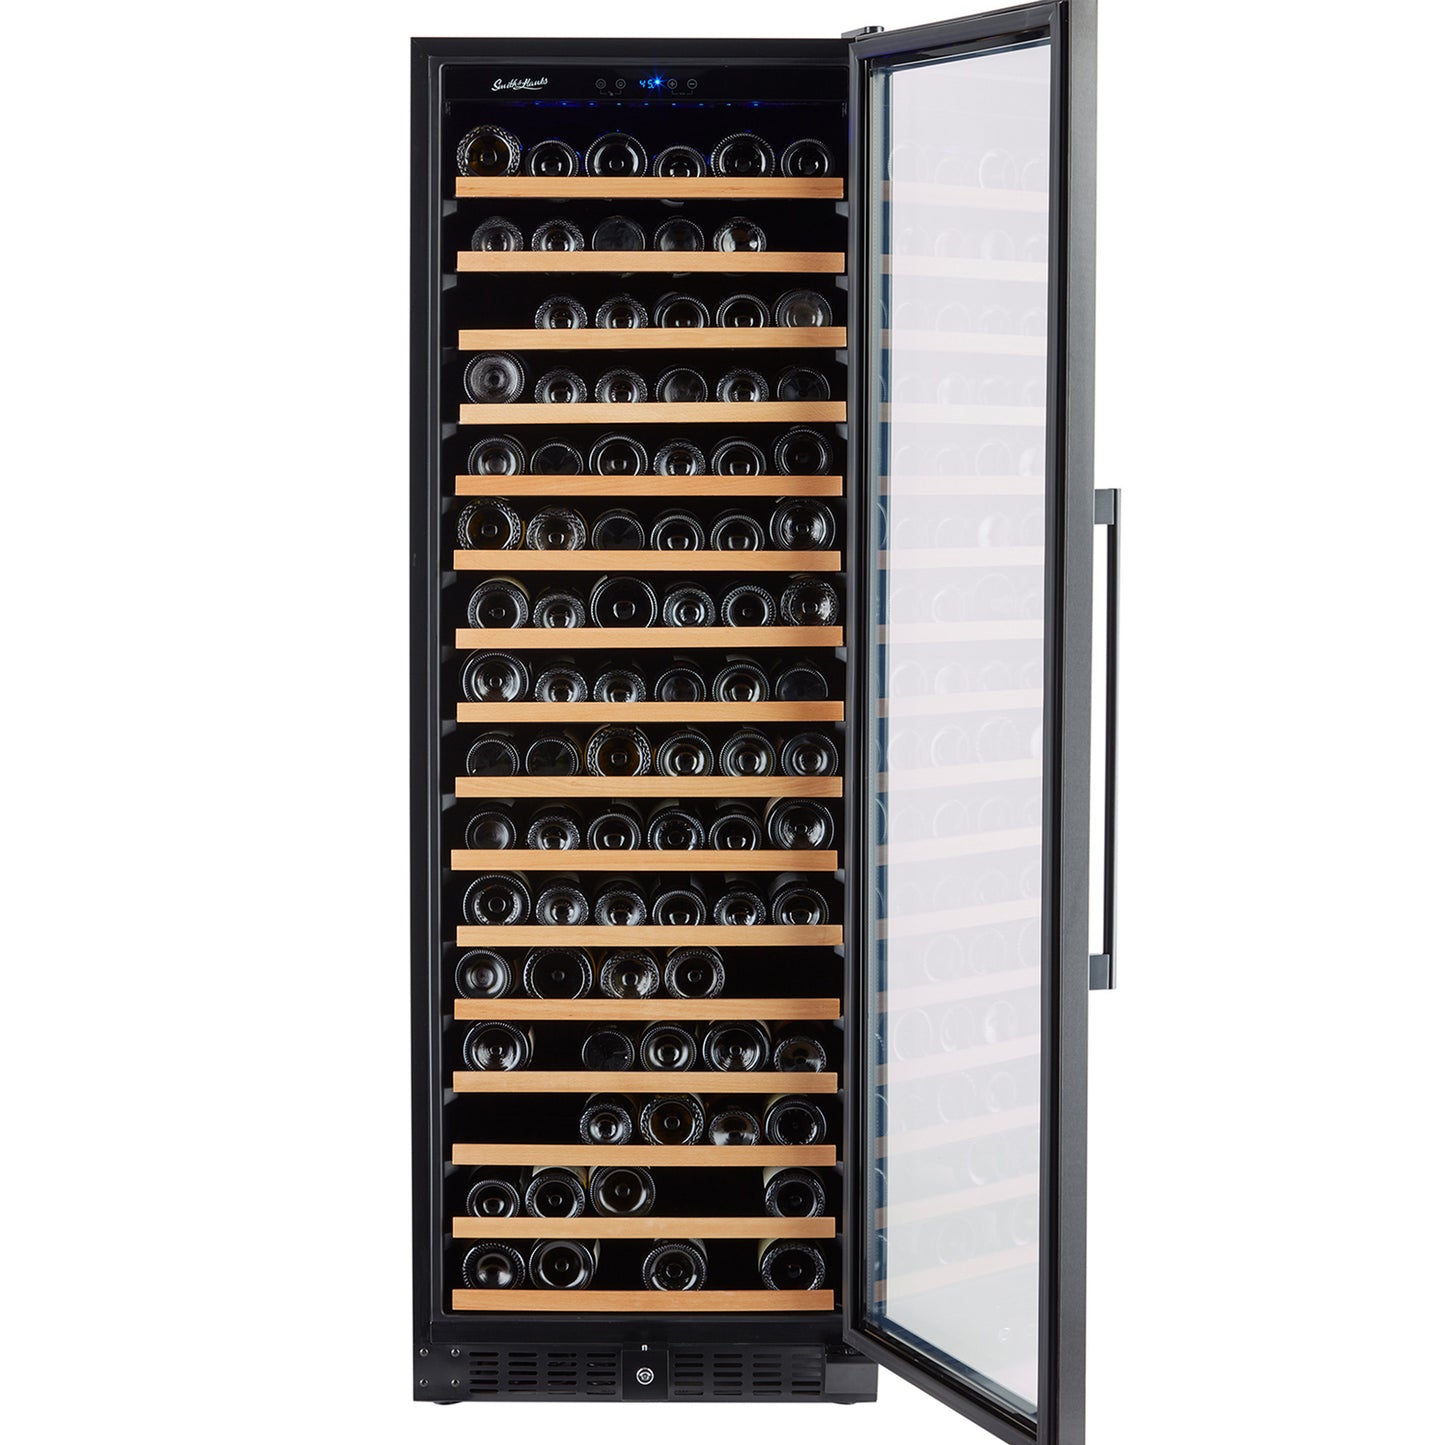 Buy a Smith & Hanks 166 Bottle Dual Zone Black Stainless Wine Refrigerator by Chilled Beverages